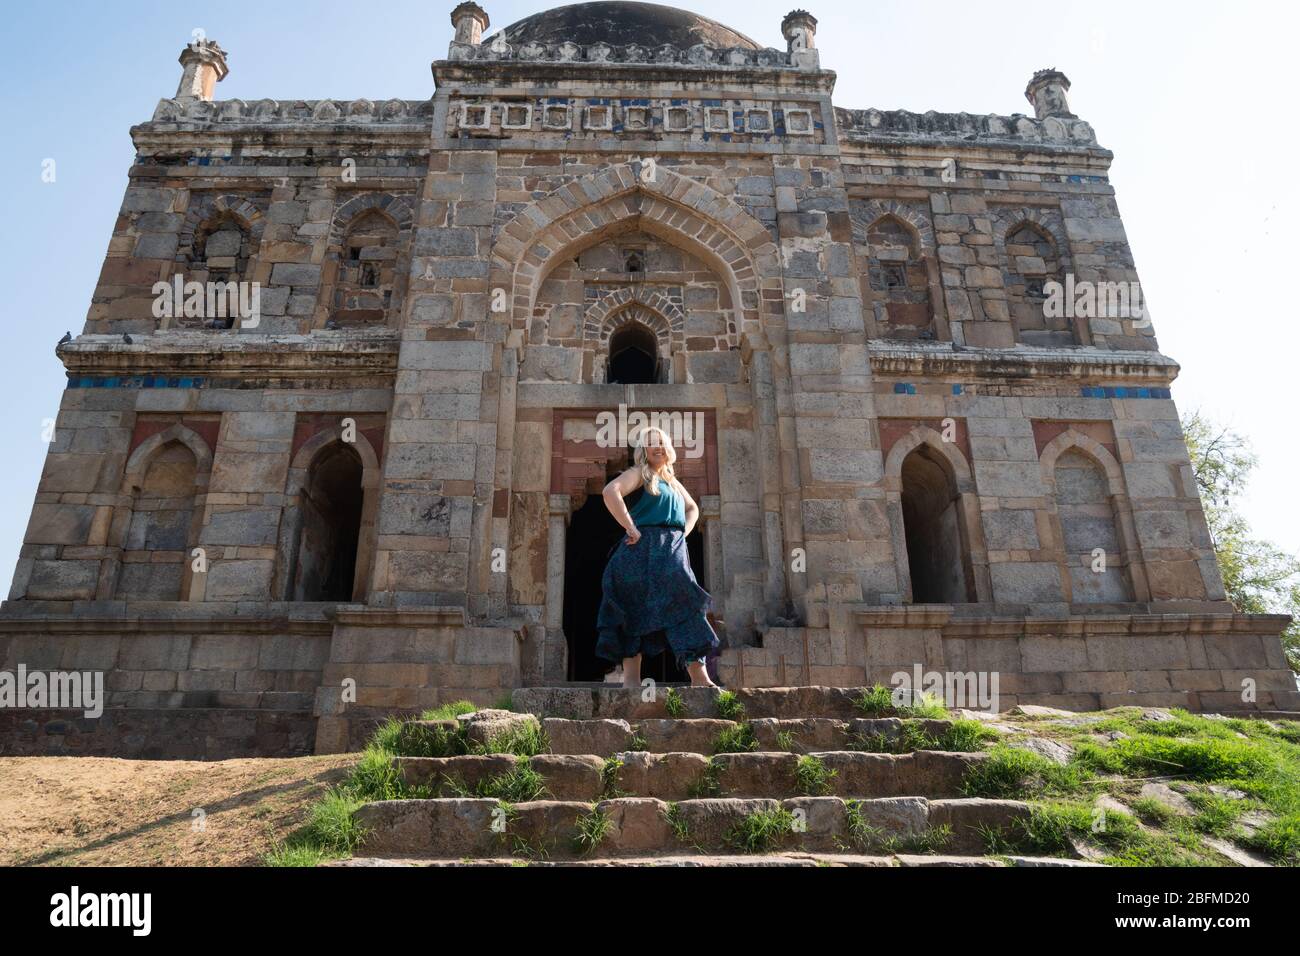 Blond tourist poses at the Tomb of Sheesh Gumbad tomb in Lodi Gardens in New Delhi, India Stock Photo